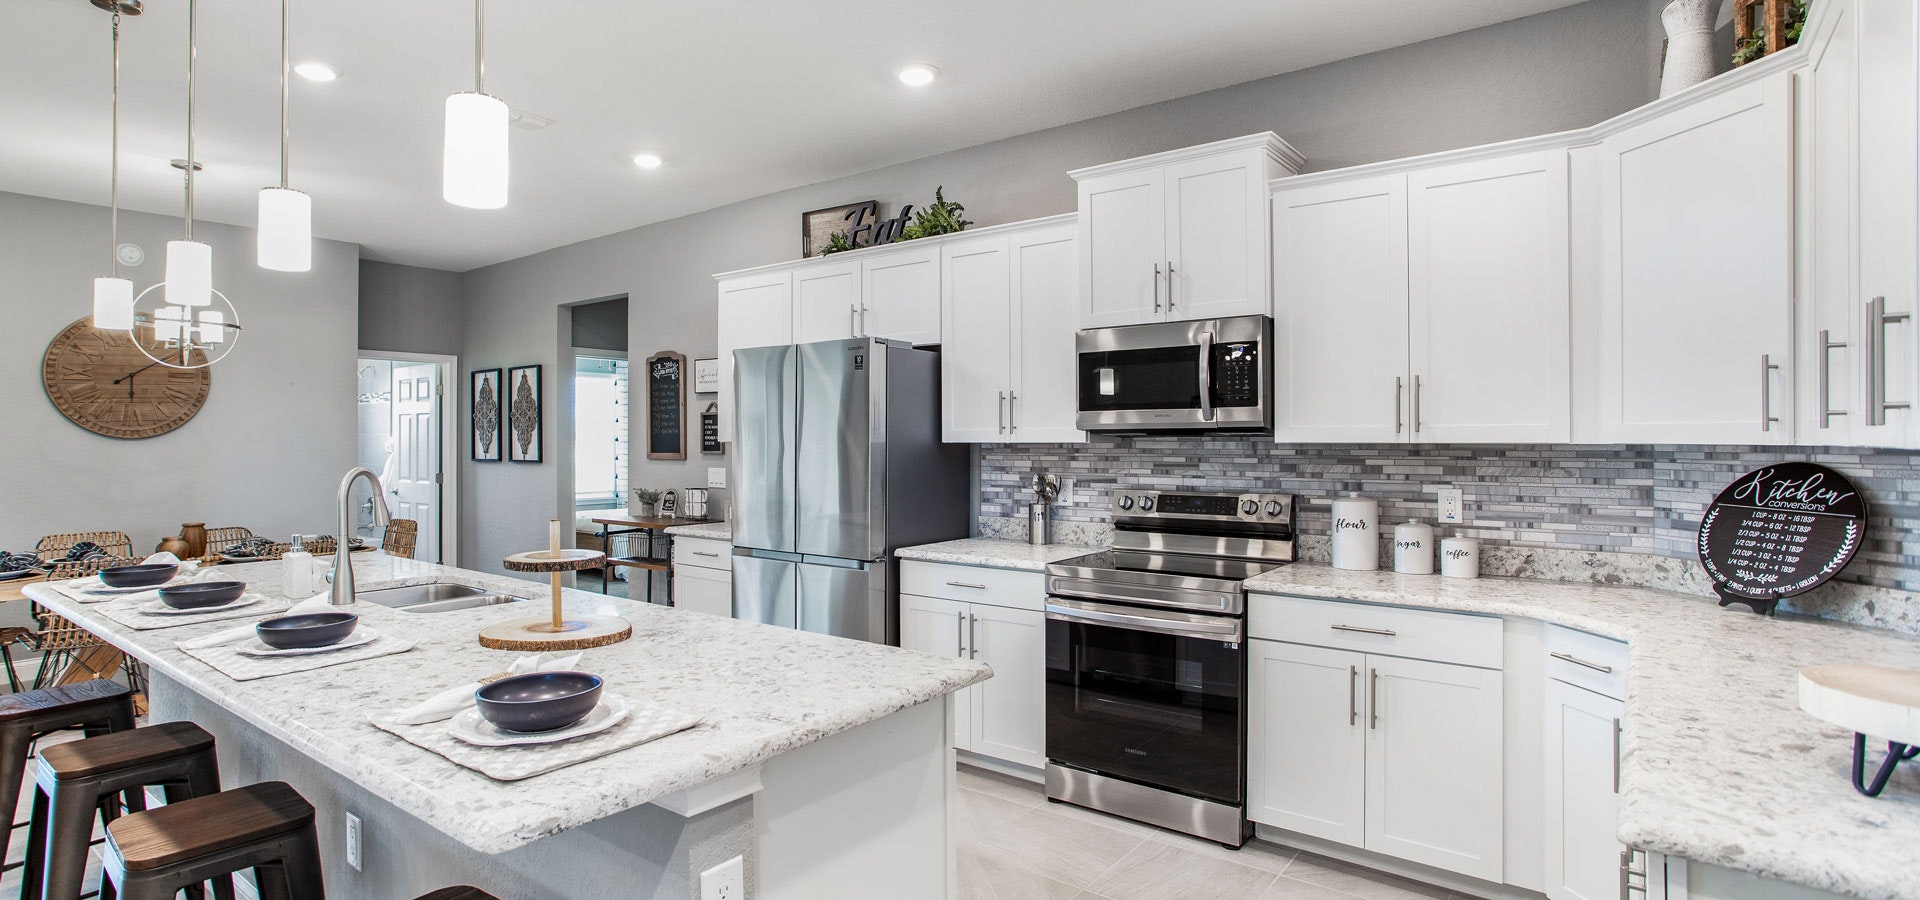 These St. Cloud new homes include a spacious, gourmet kitchen